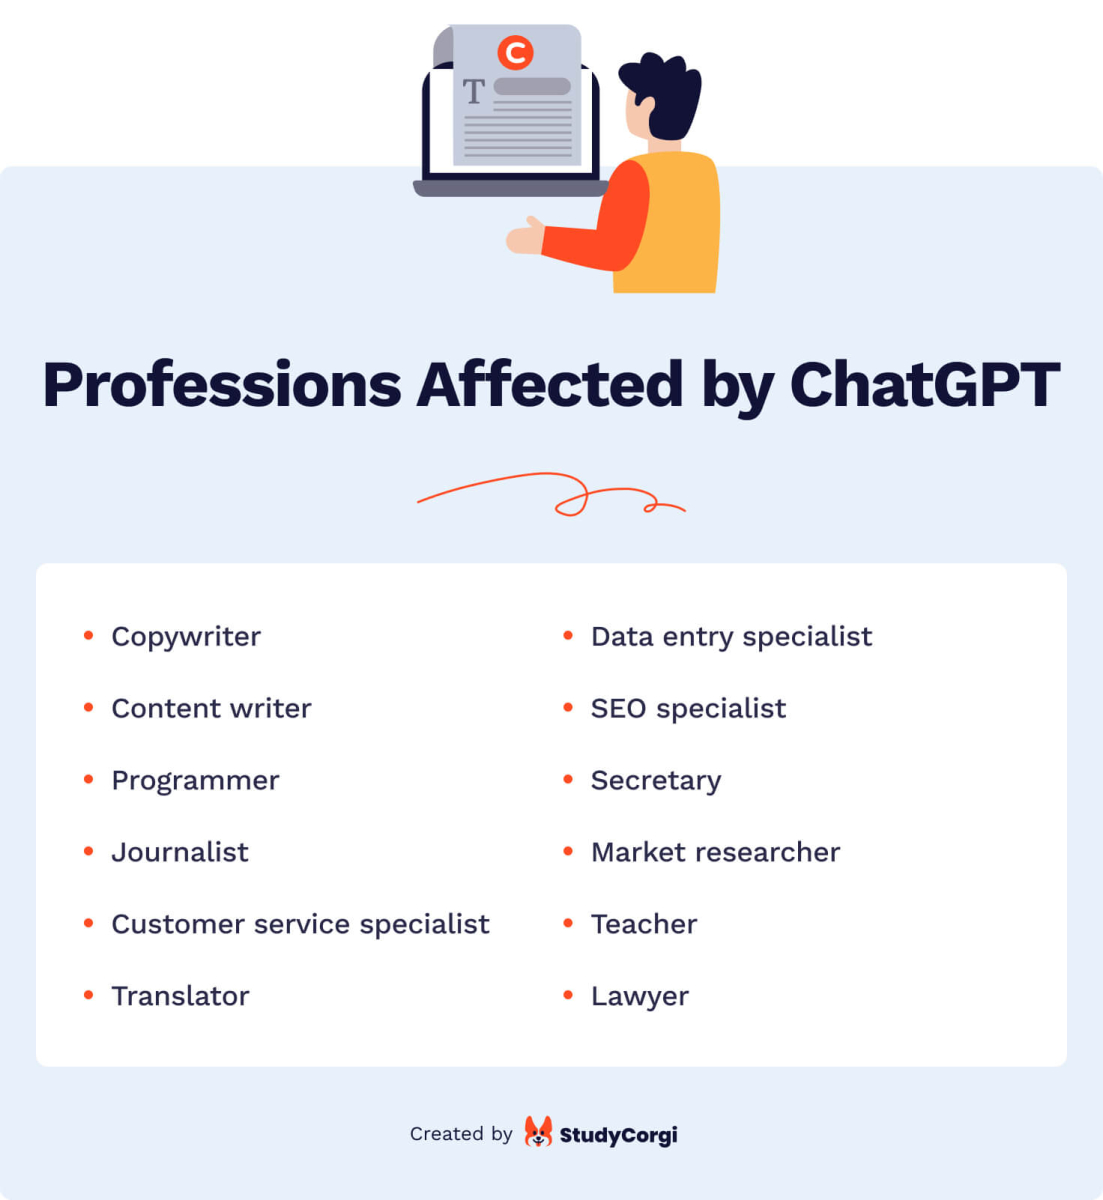 The picture provides list of professions that will be affected by ChatGPT.